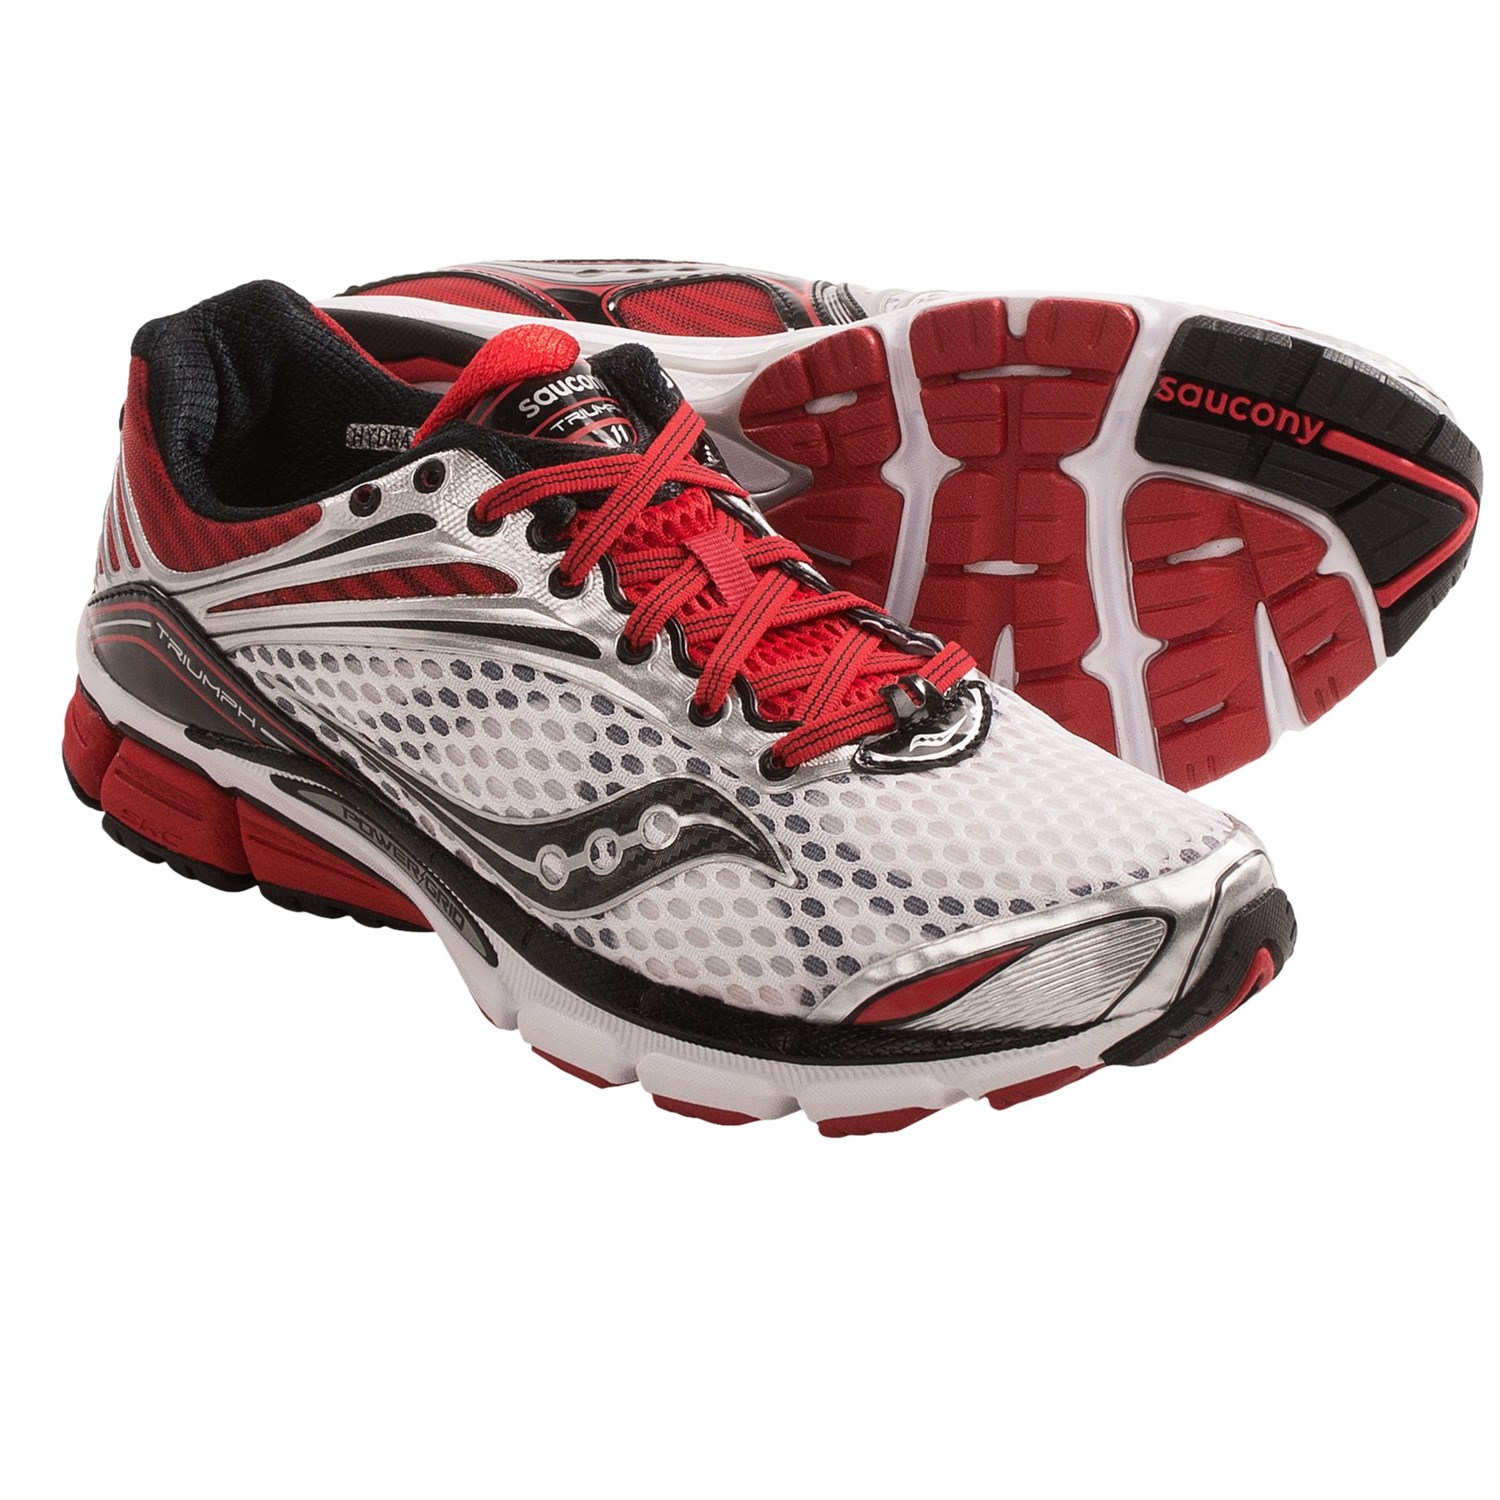 Saucony Triumph 11 Running Shoes (For Men) 8011N - Save 28%